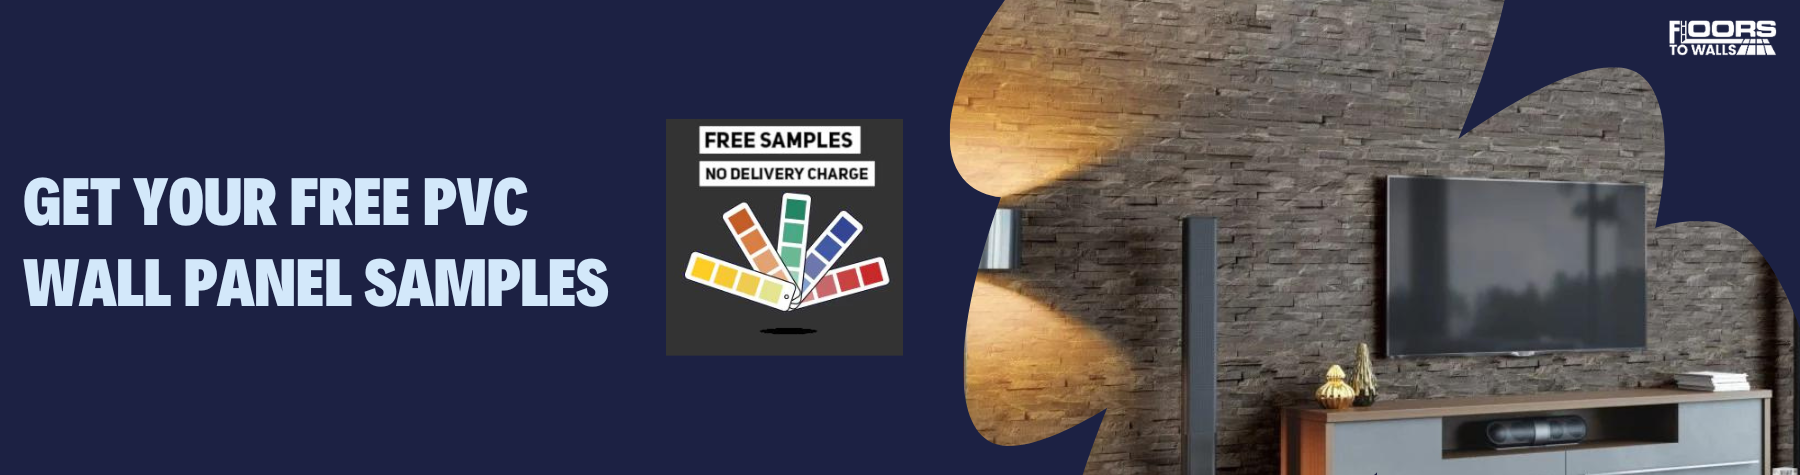 Get Your Free PVC Wall Panel Samples